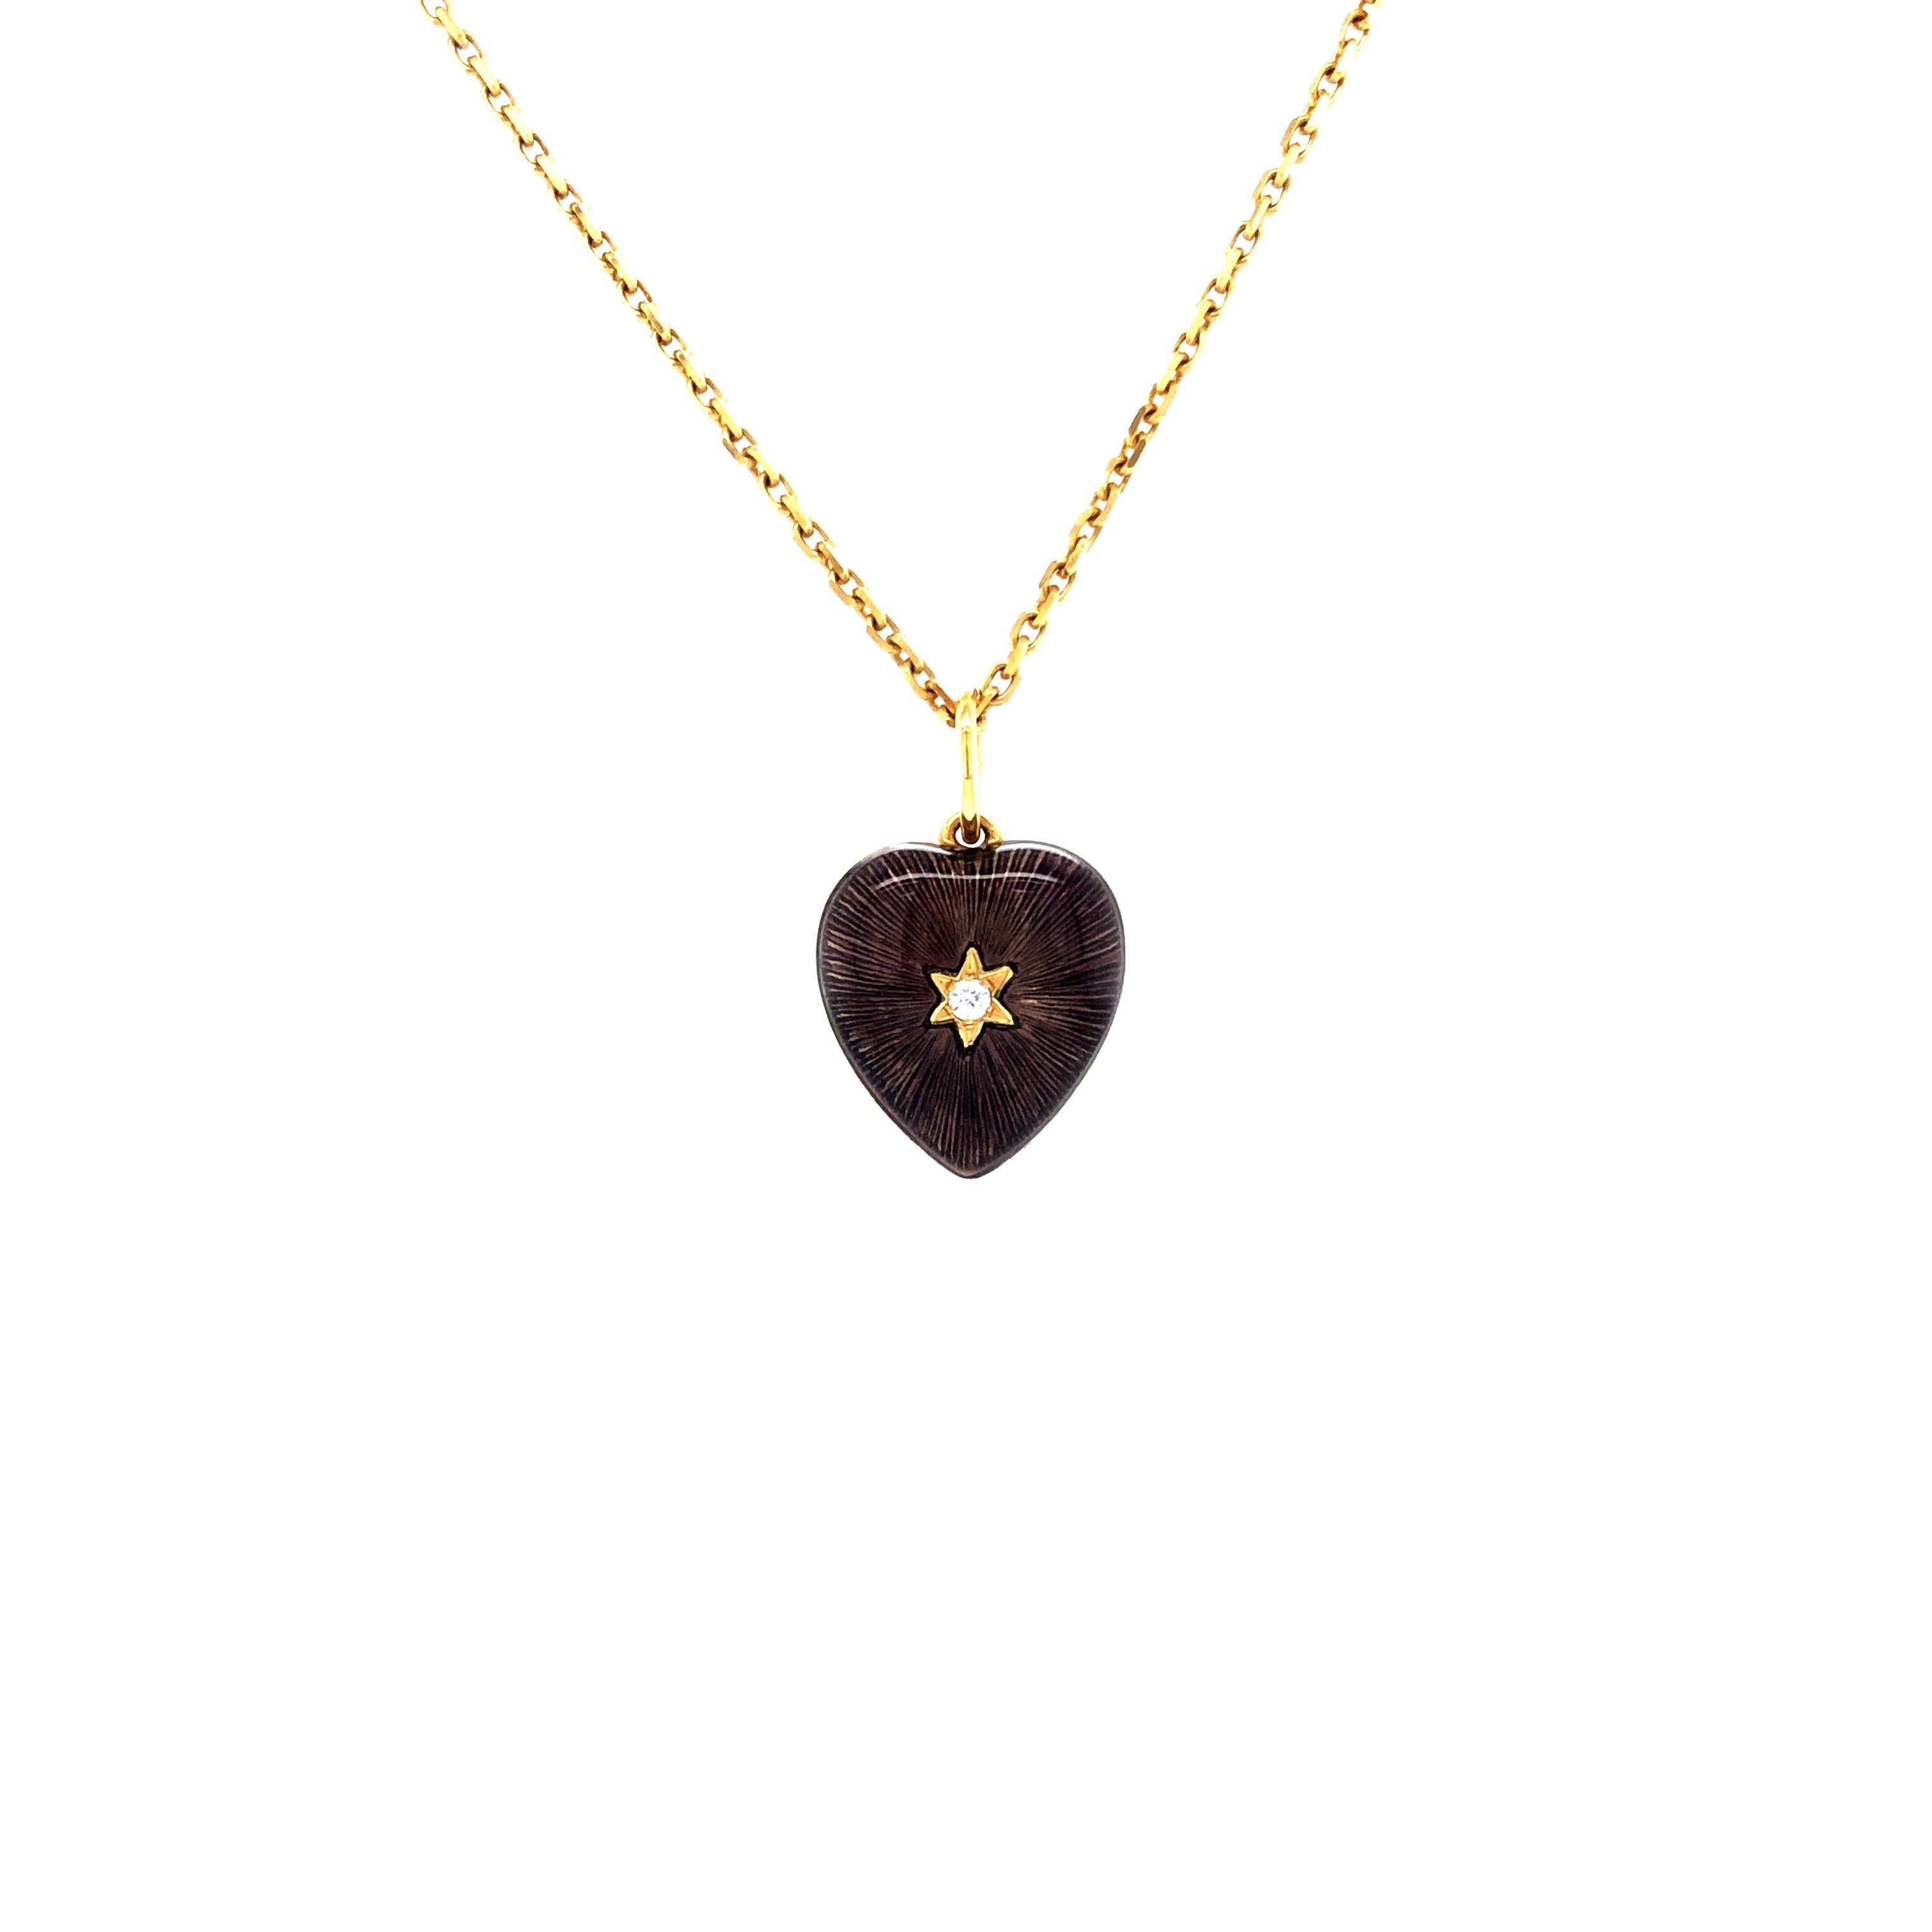 Victor Mayer heart pendant, Hallmark Collection, with star 18k yellow gold, purple vitreous enamel, 2 diamonds, total 0.03 ct, G VS brilliant cut

About the creator Victor Mayer
Victor Mayer is internationally renowned for elegant timeless designs